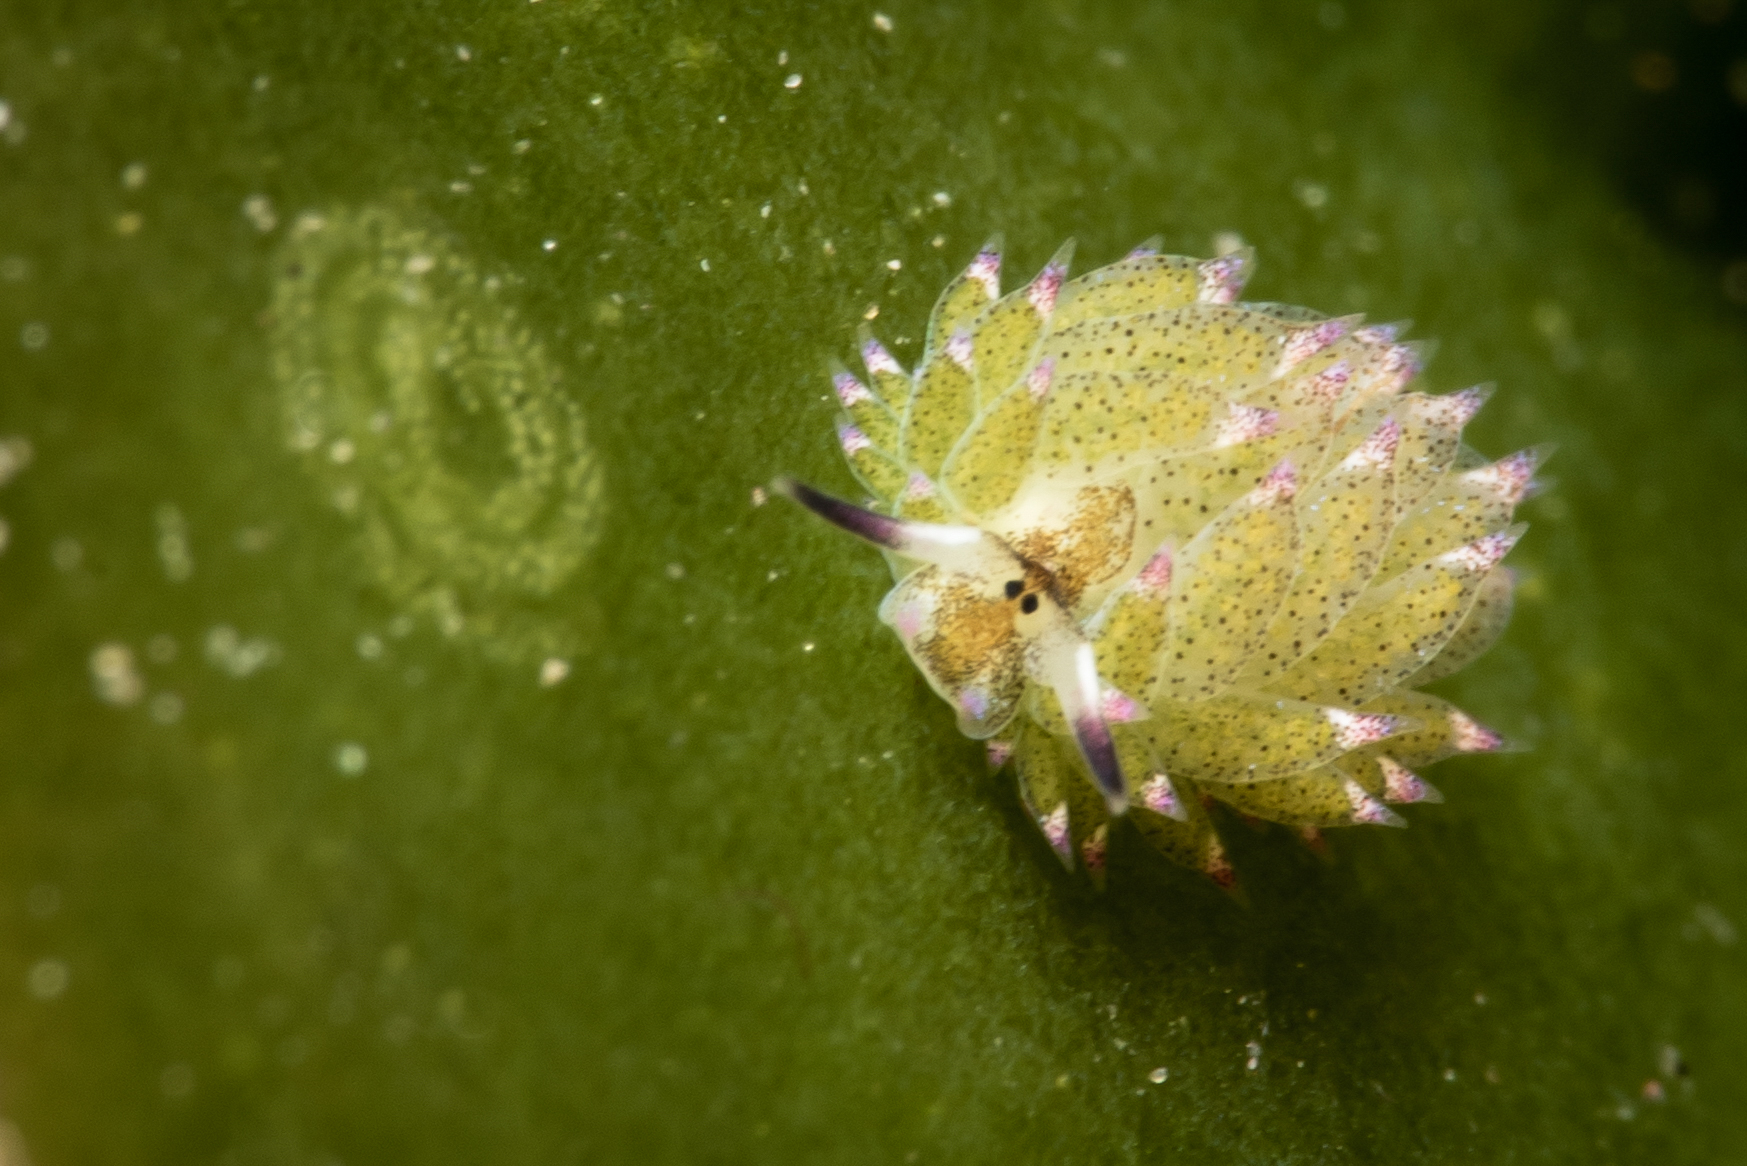 Costasiella sp. or Shaun the Sheep nudibranch with eggs, by Brandi Mueller